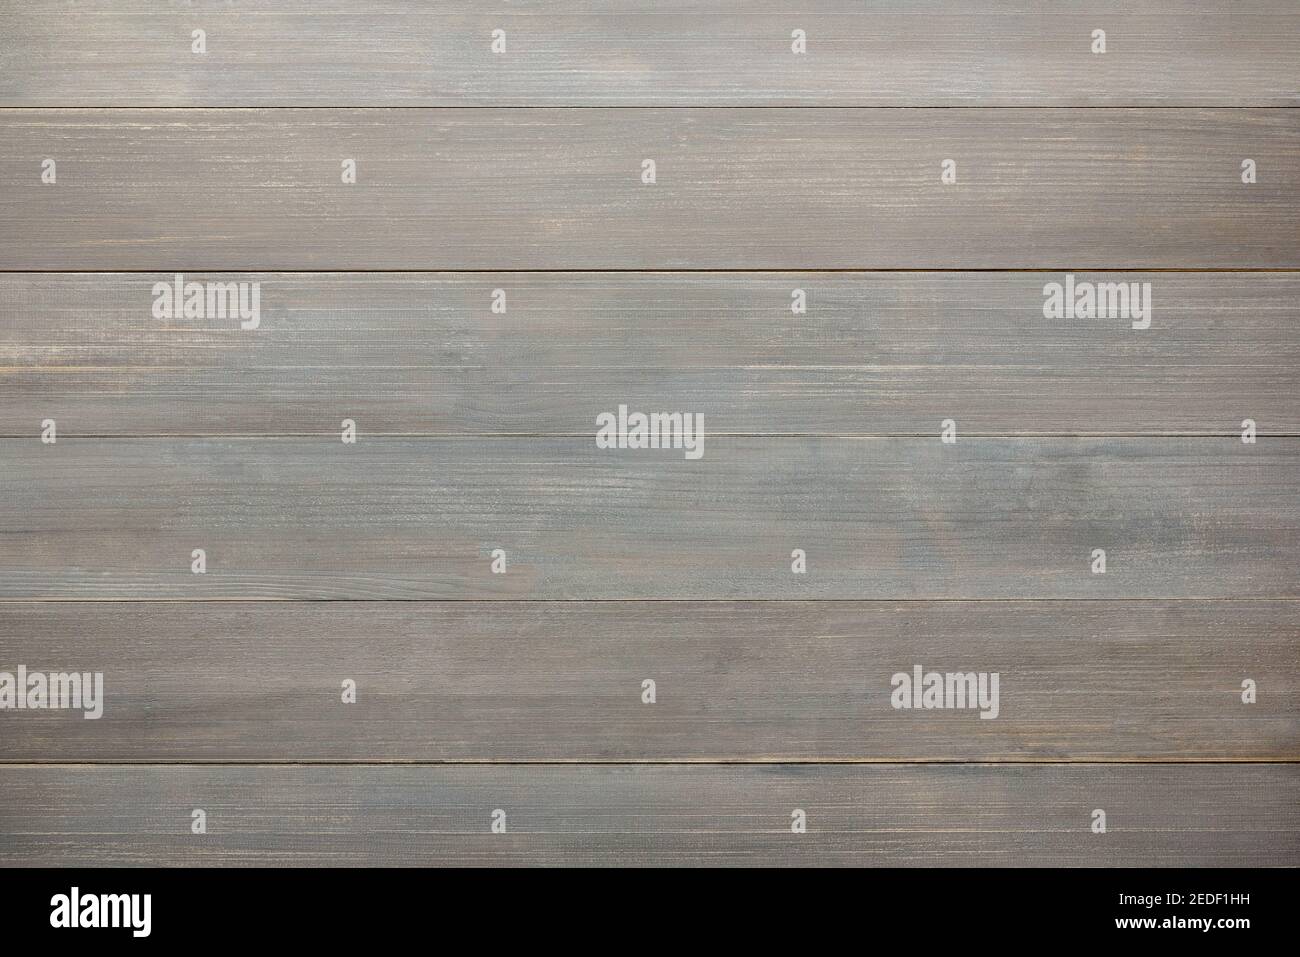 Vintage style light brown wood panel texture top view for background Stock Photo